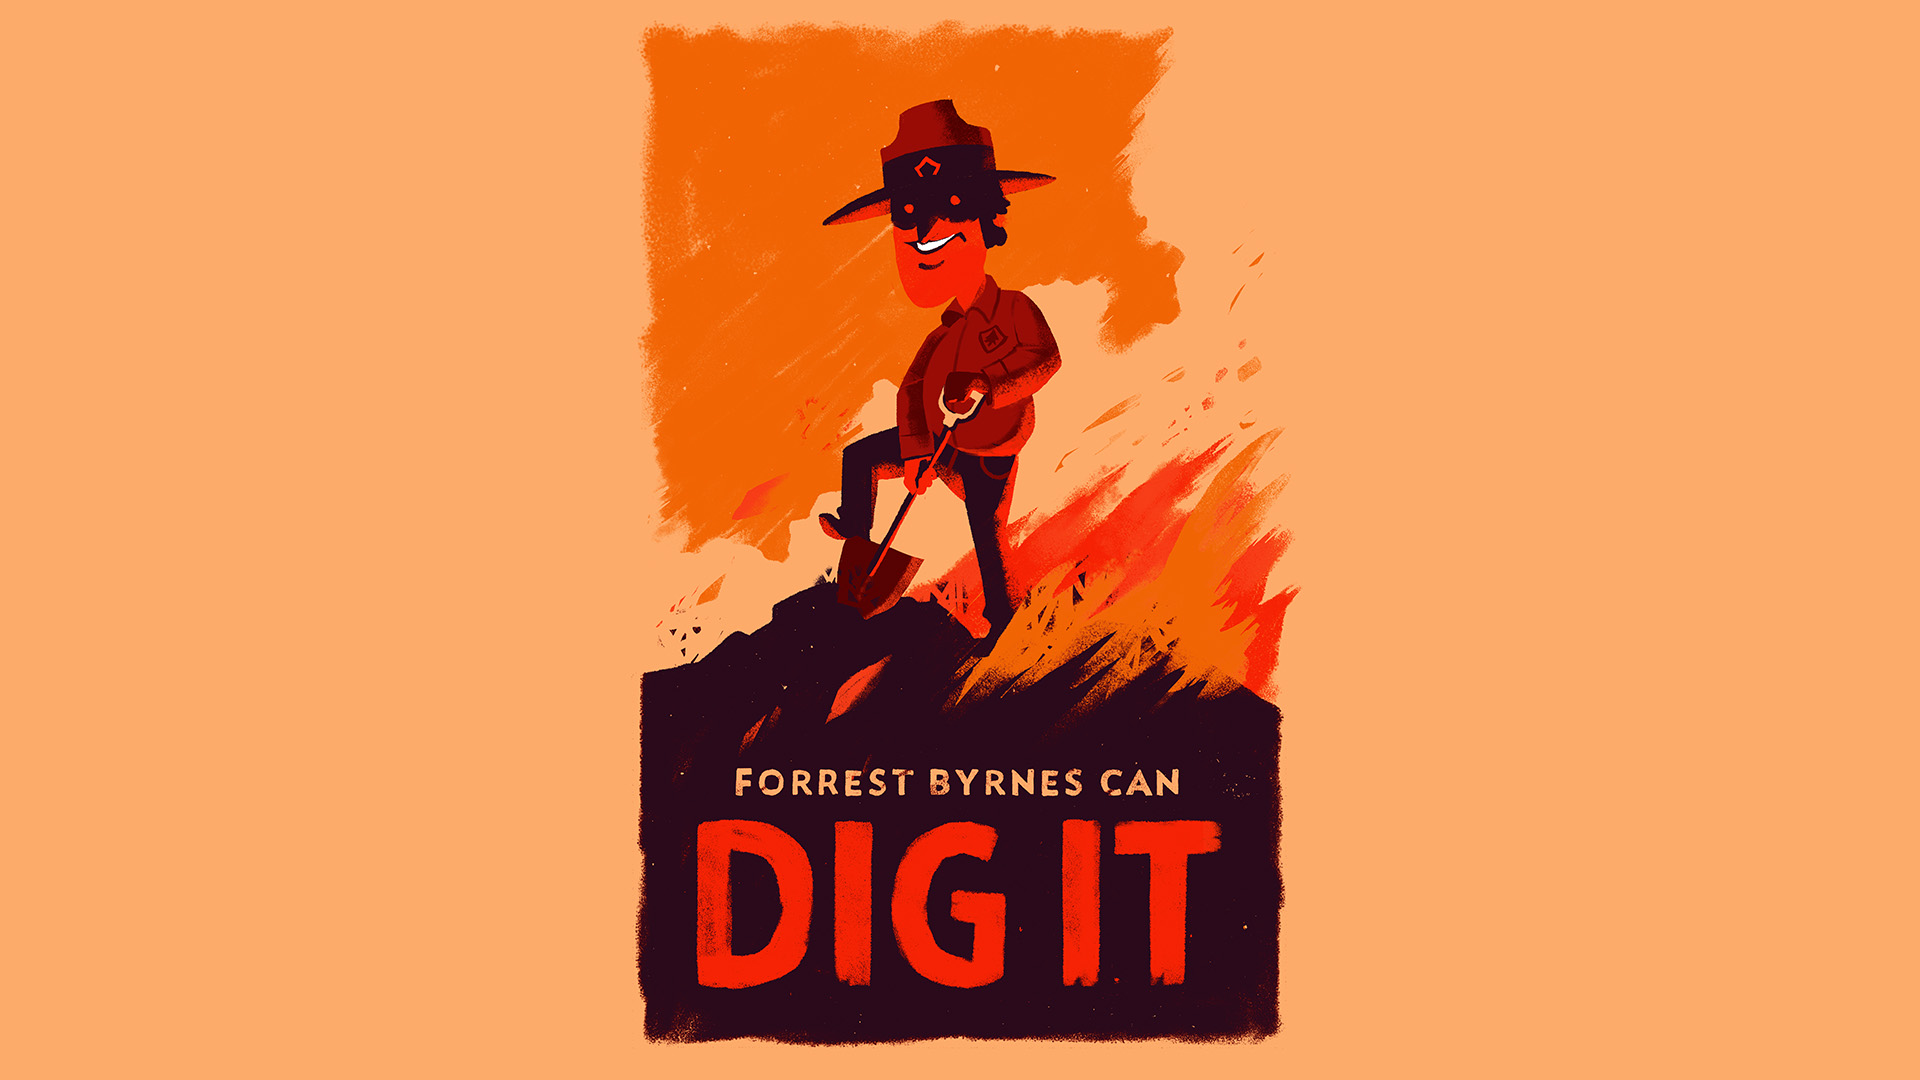 General 1920x1080 Firewatch video games poster bright simple background hat digital art shovels minimalism standing fire smiling yellow background uniform glowing eyes